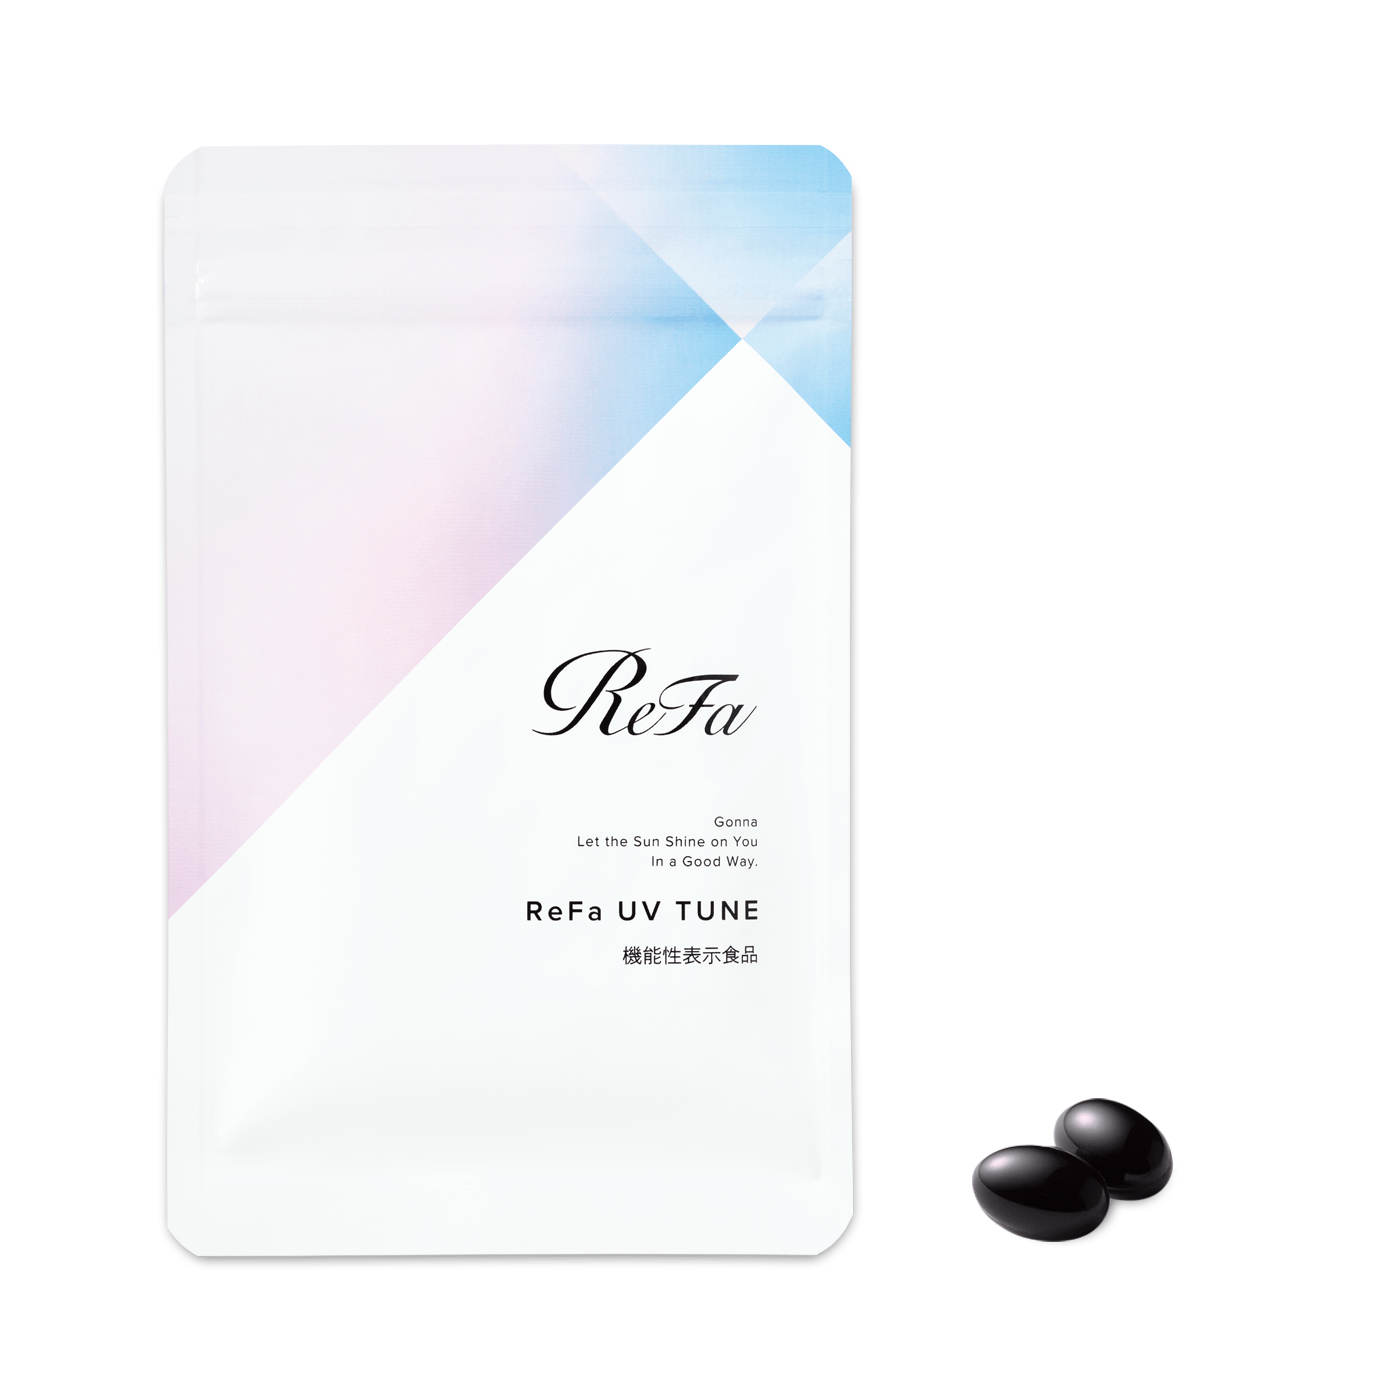 Introducing the ReFa UV TUNE, food with function claims that contains two functional ingredients to protect your whole body's skin from the inside, and was released on Tuesday, February 21.